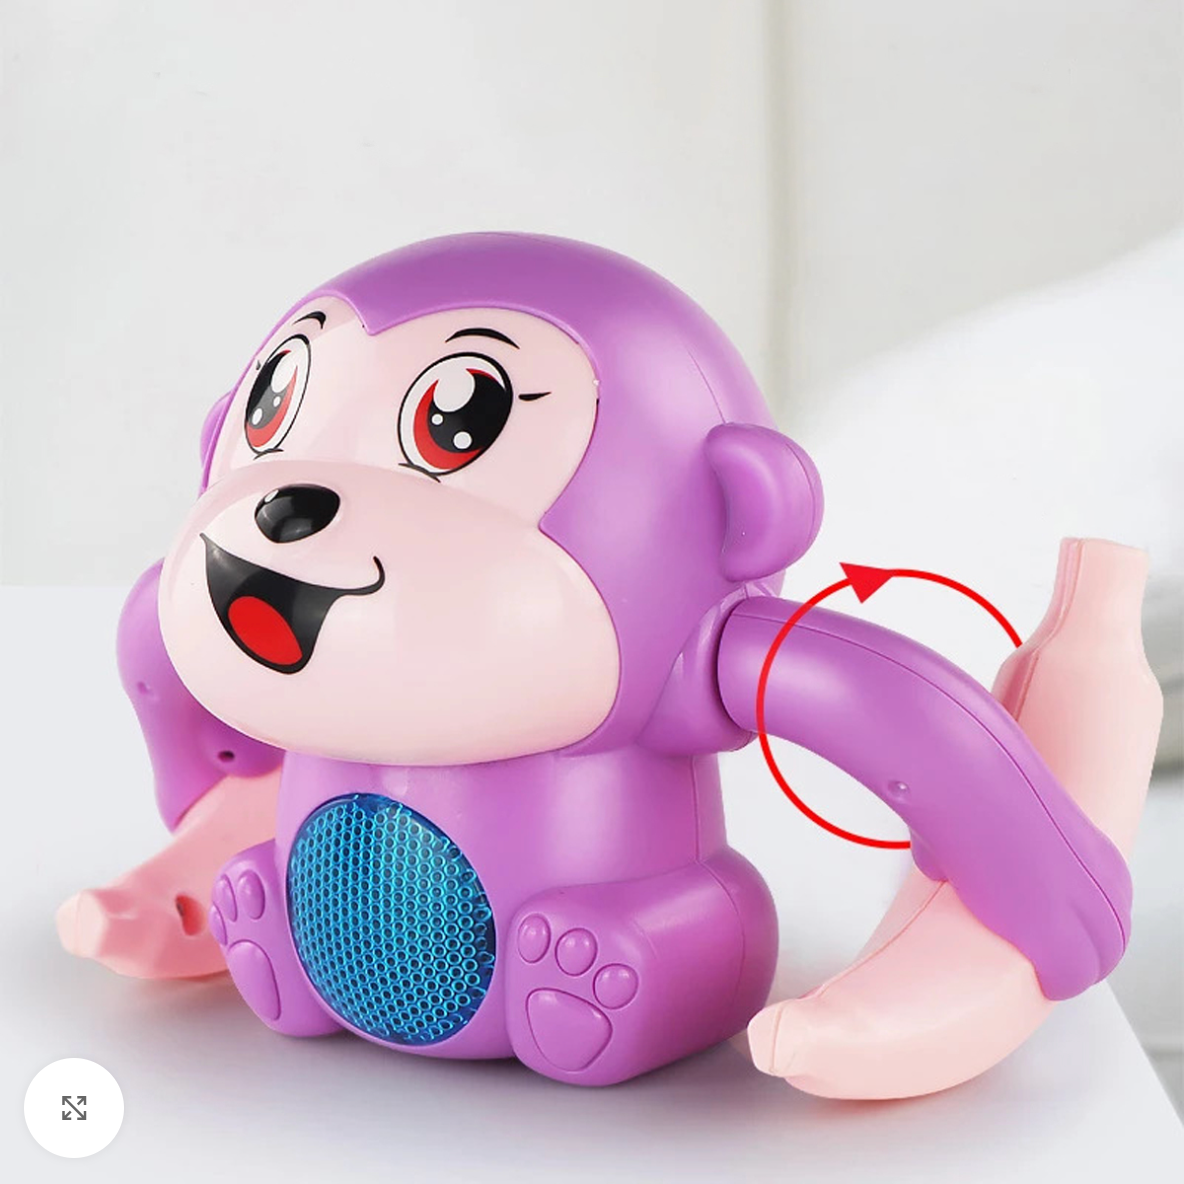 Jumpin' Jacks: The Early Infant Electric Flip and Head Monkey Toy